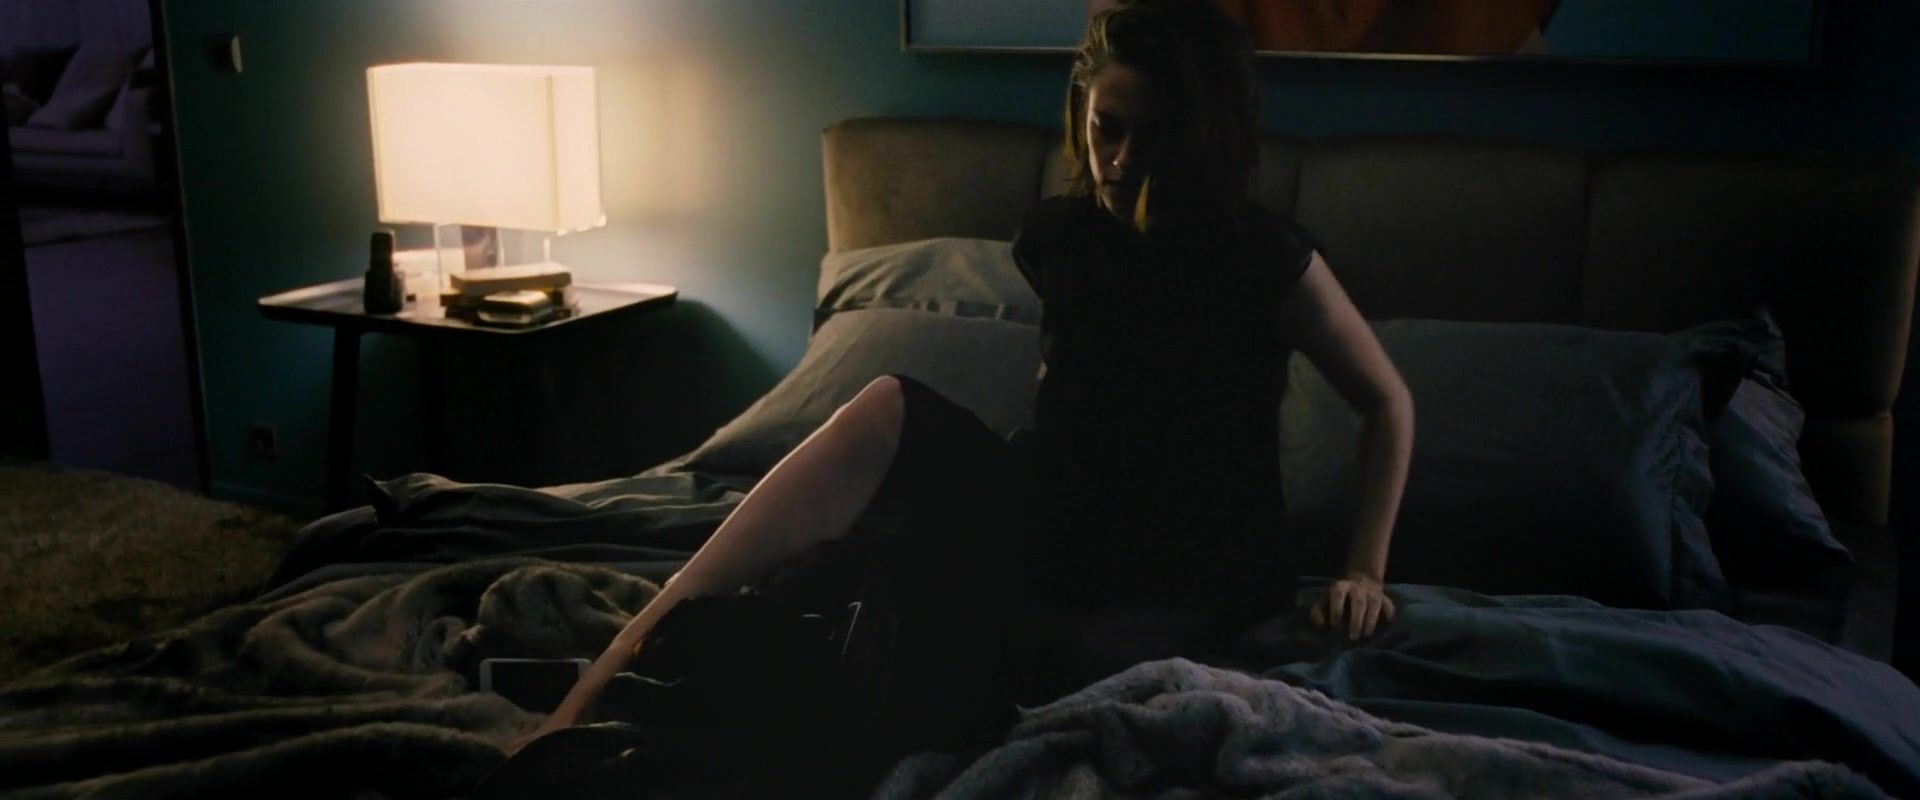 RedTube Best Celebs Scenes with naked Kristen Stewart of the movie "Personal Shopper" Cowgirl